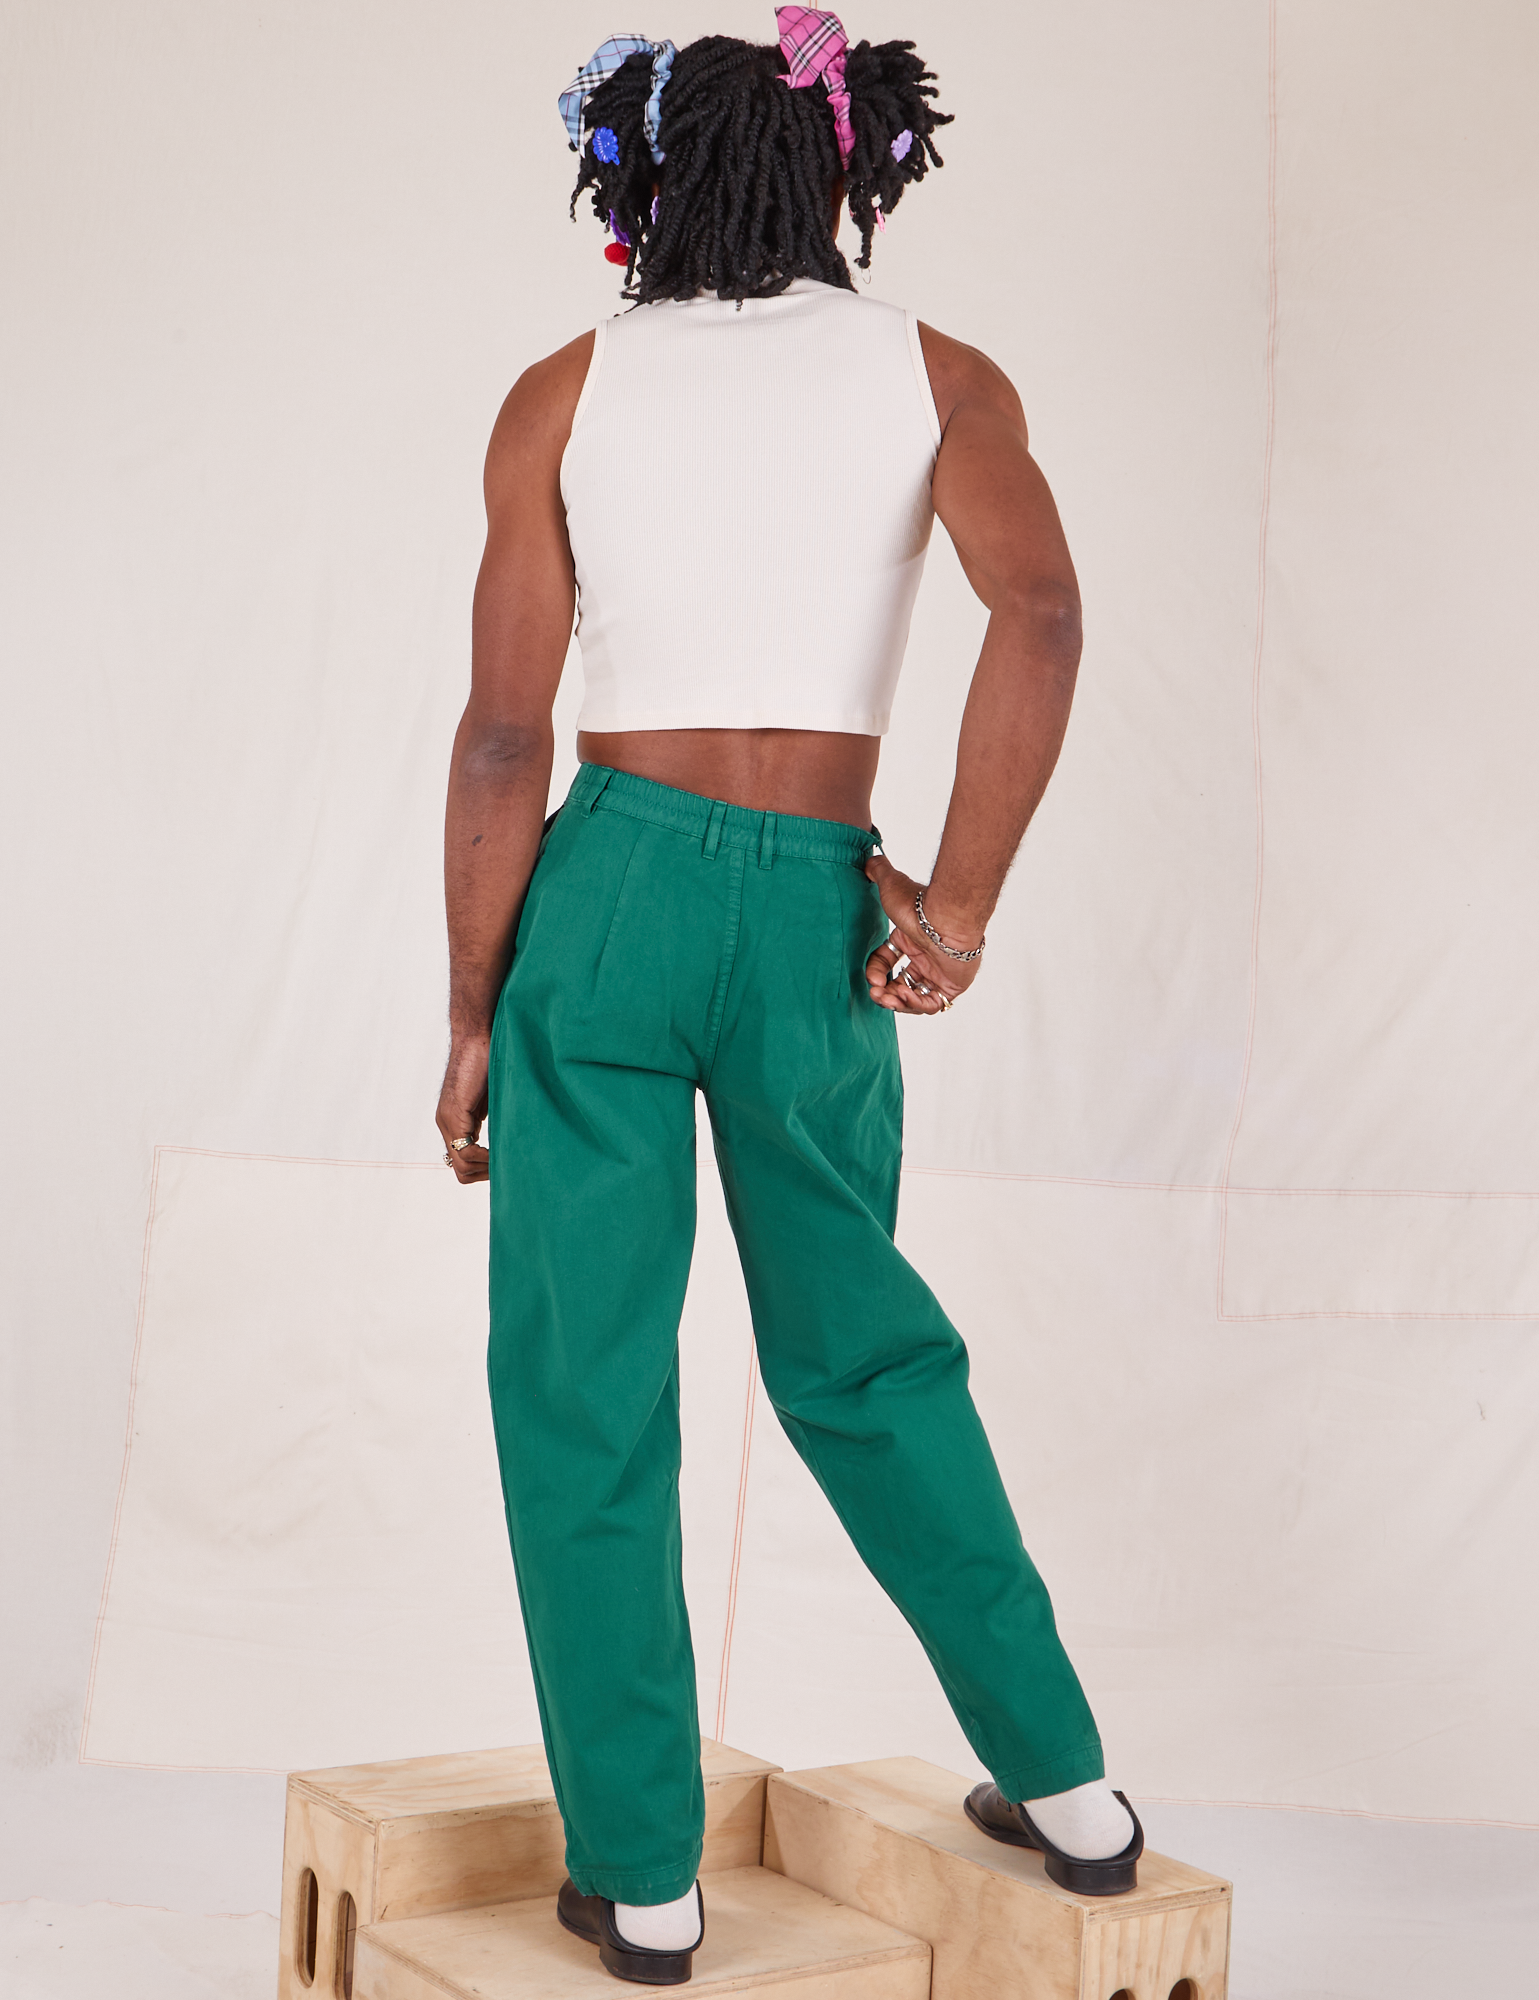 Back view of Heavyweight Trousers in Hunter Green and Sleeveless Turtleneck in vintage tee off-white on Jerrod